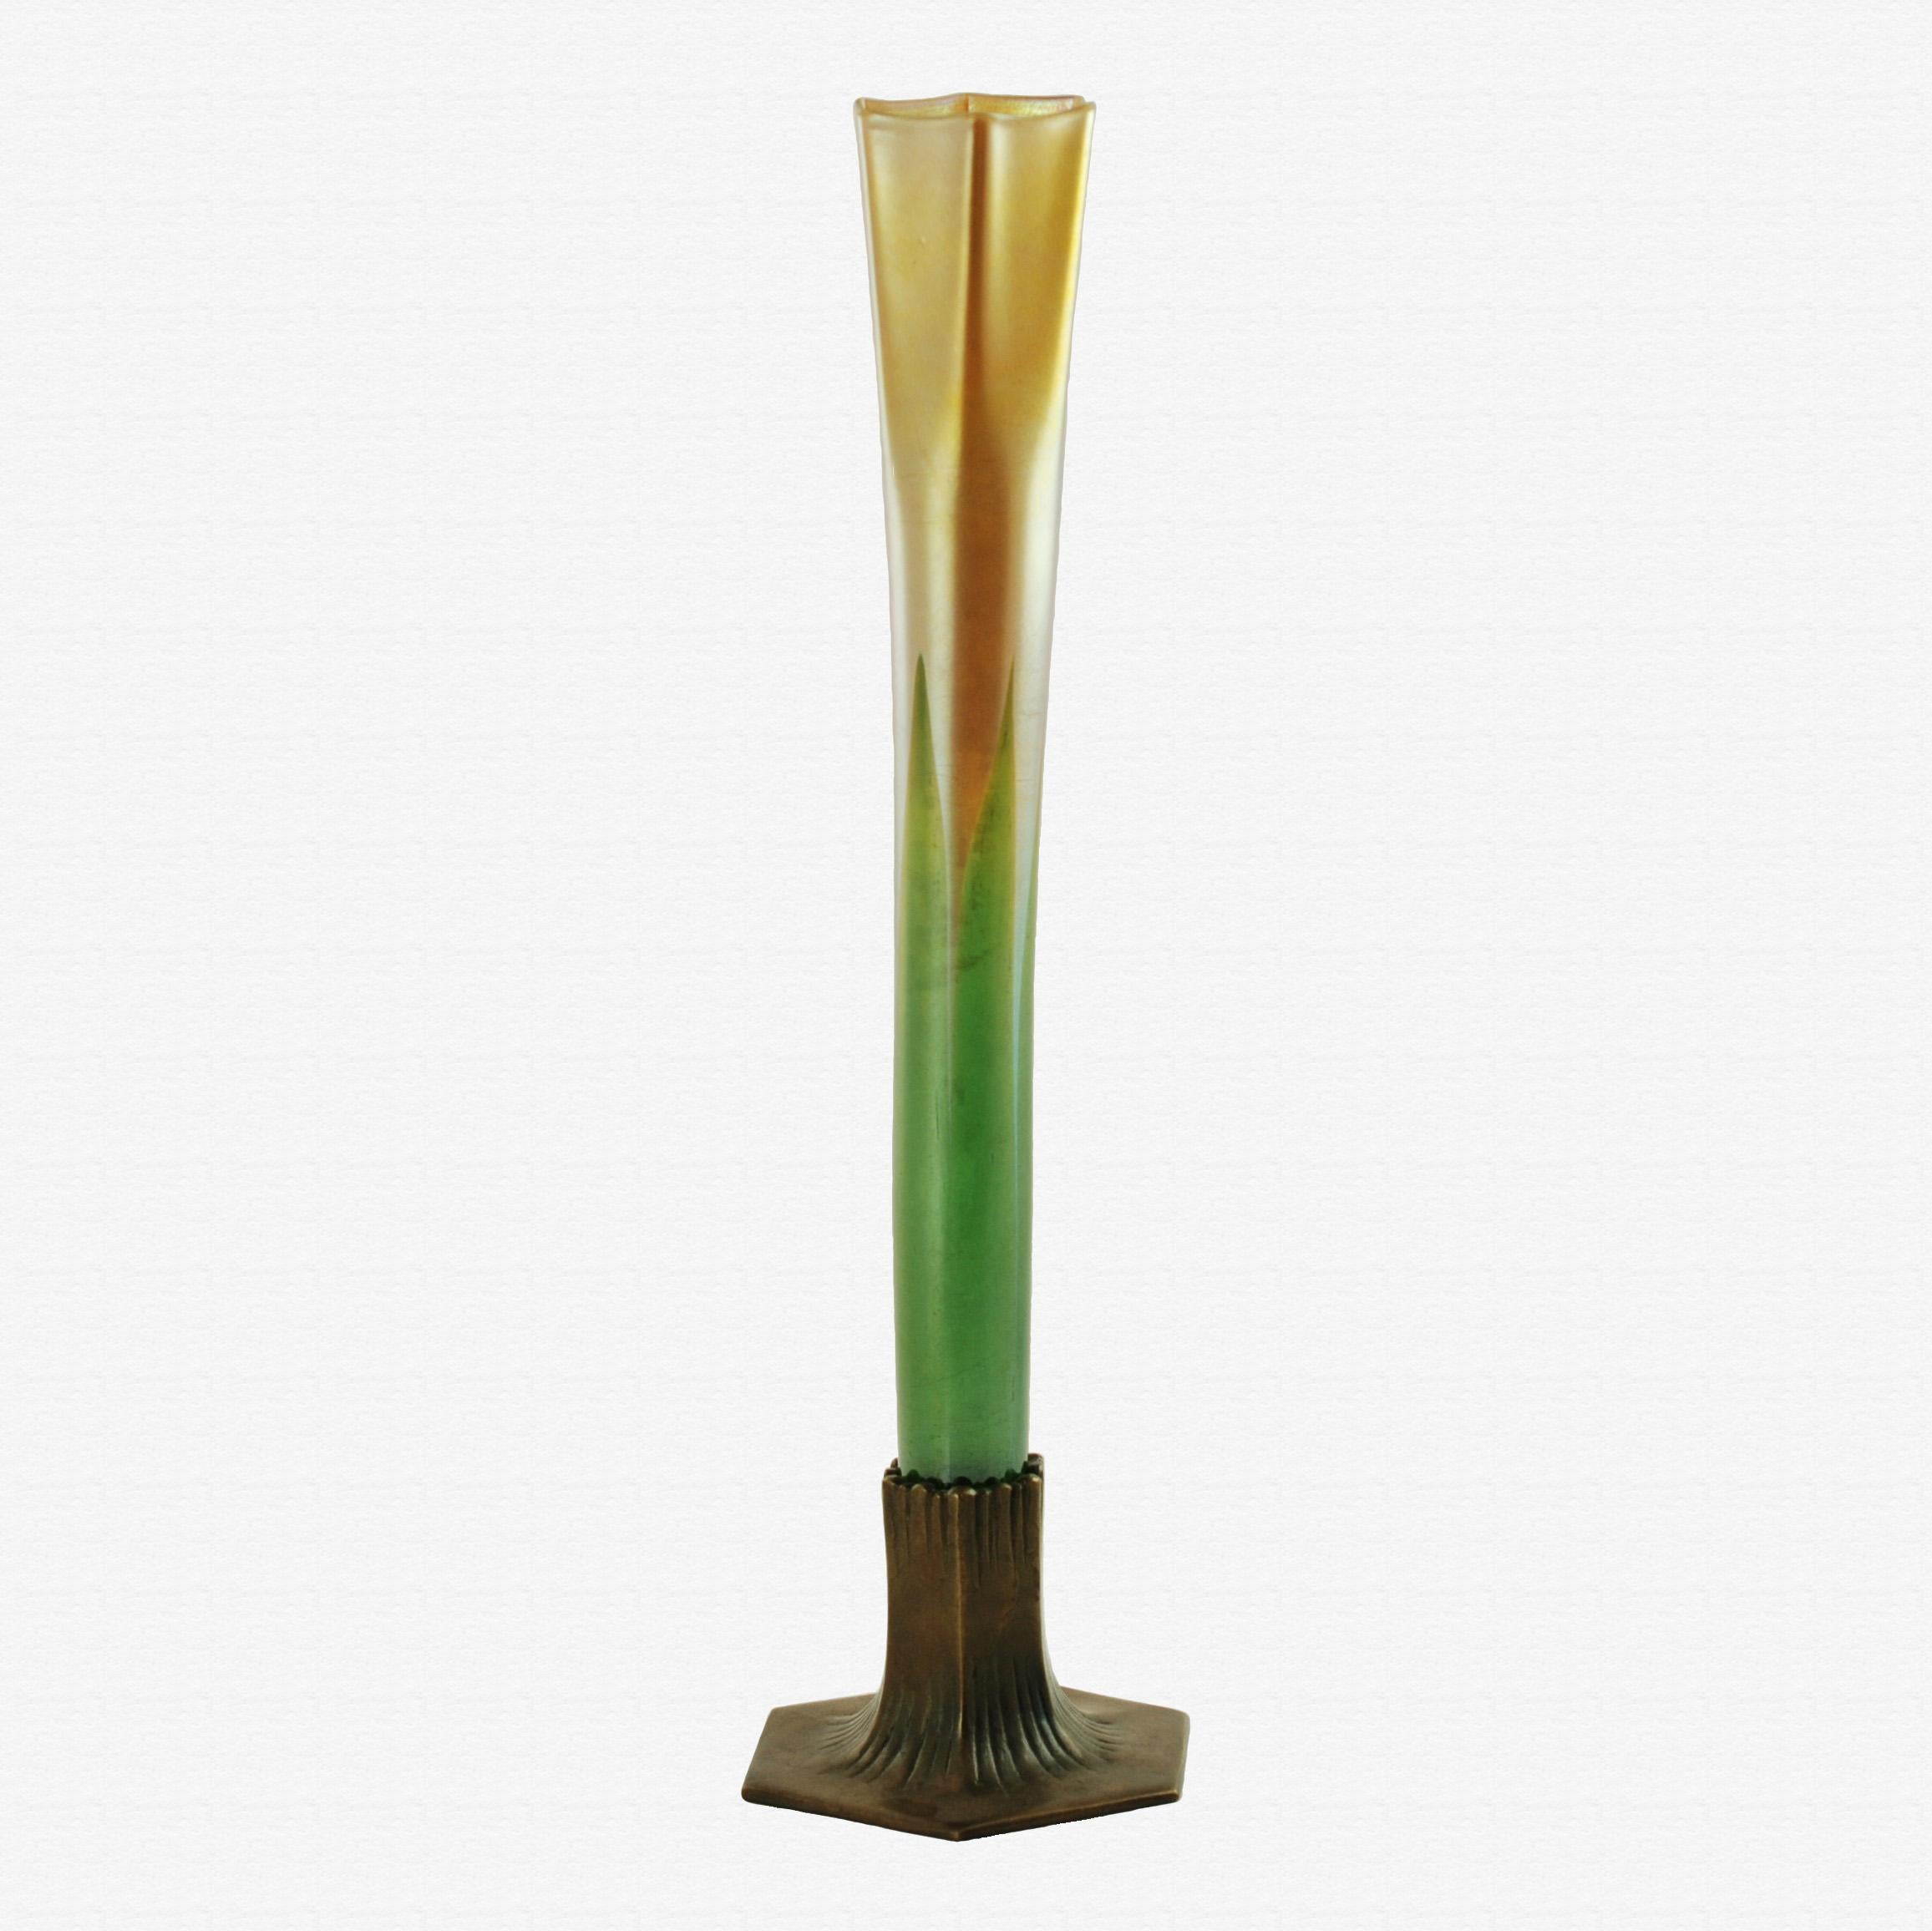 This tall Favrile glass bud vase was made by Tiffany and transitions from bottle green to a warm, iridescent gold color. The body of the vase has a cylindrical shape at the bottom which gently flares out at the top to form a ribbed mouth with six